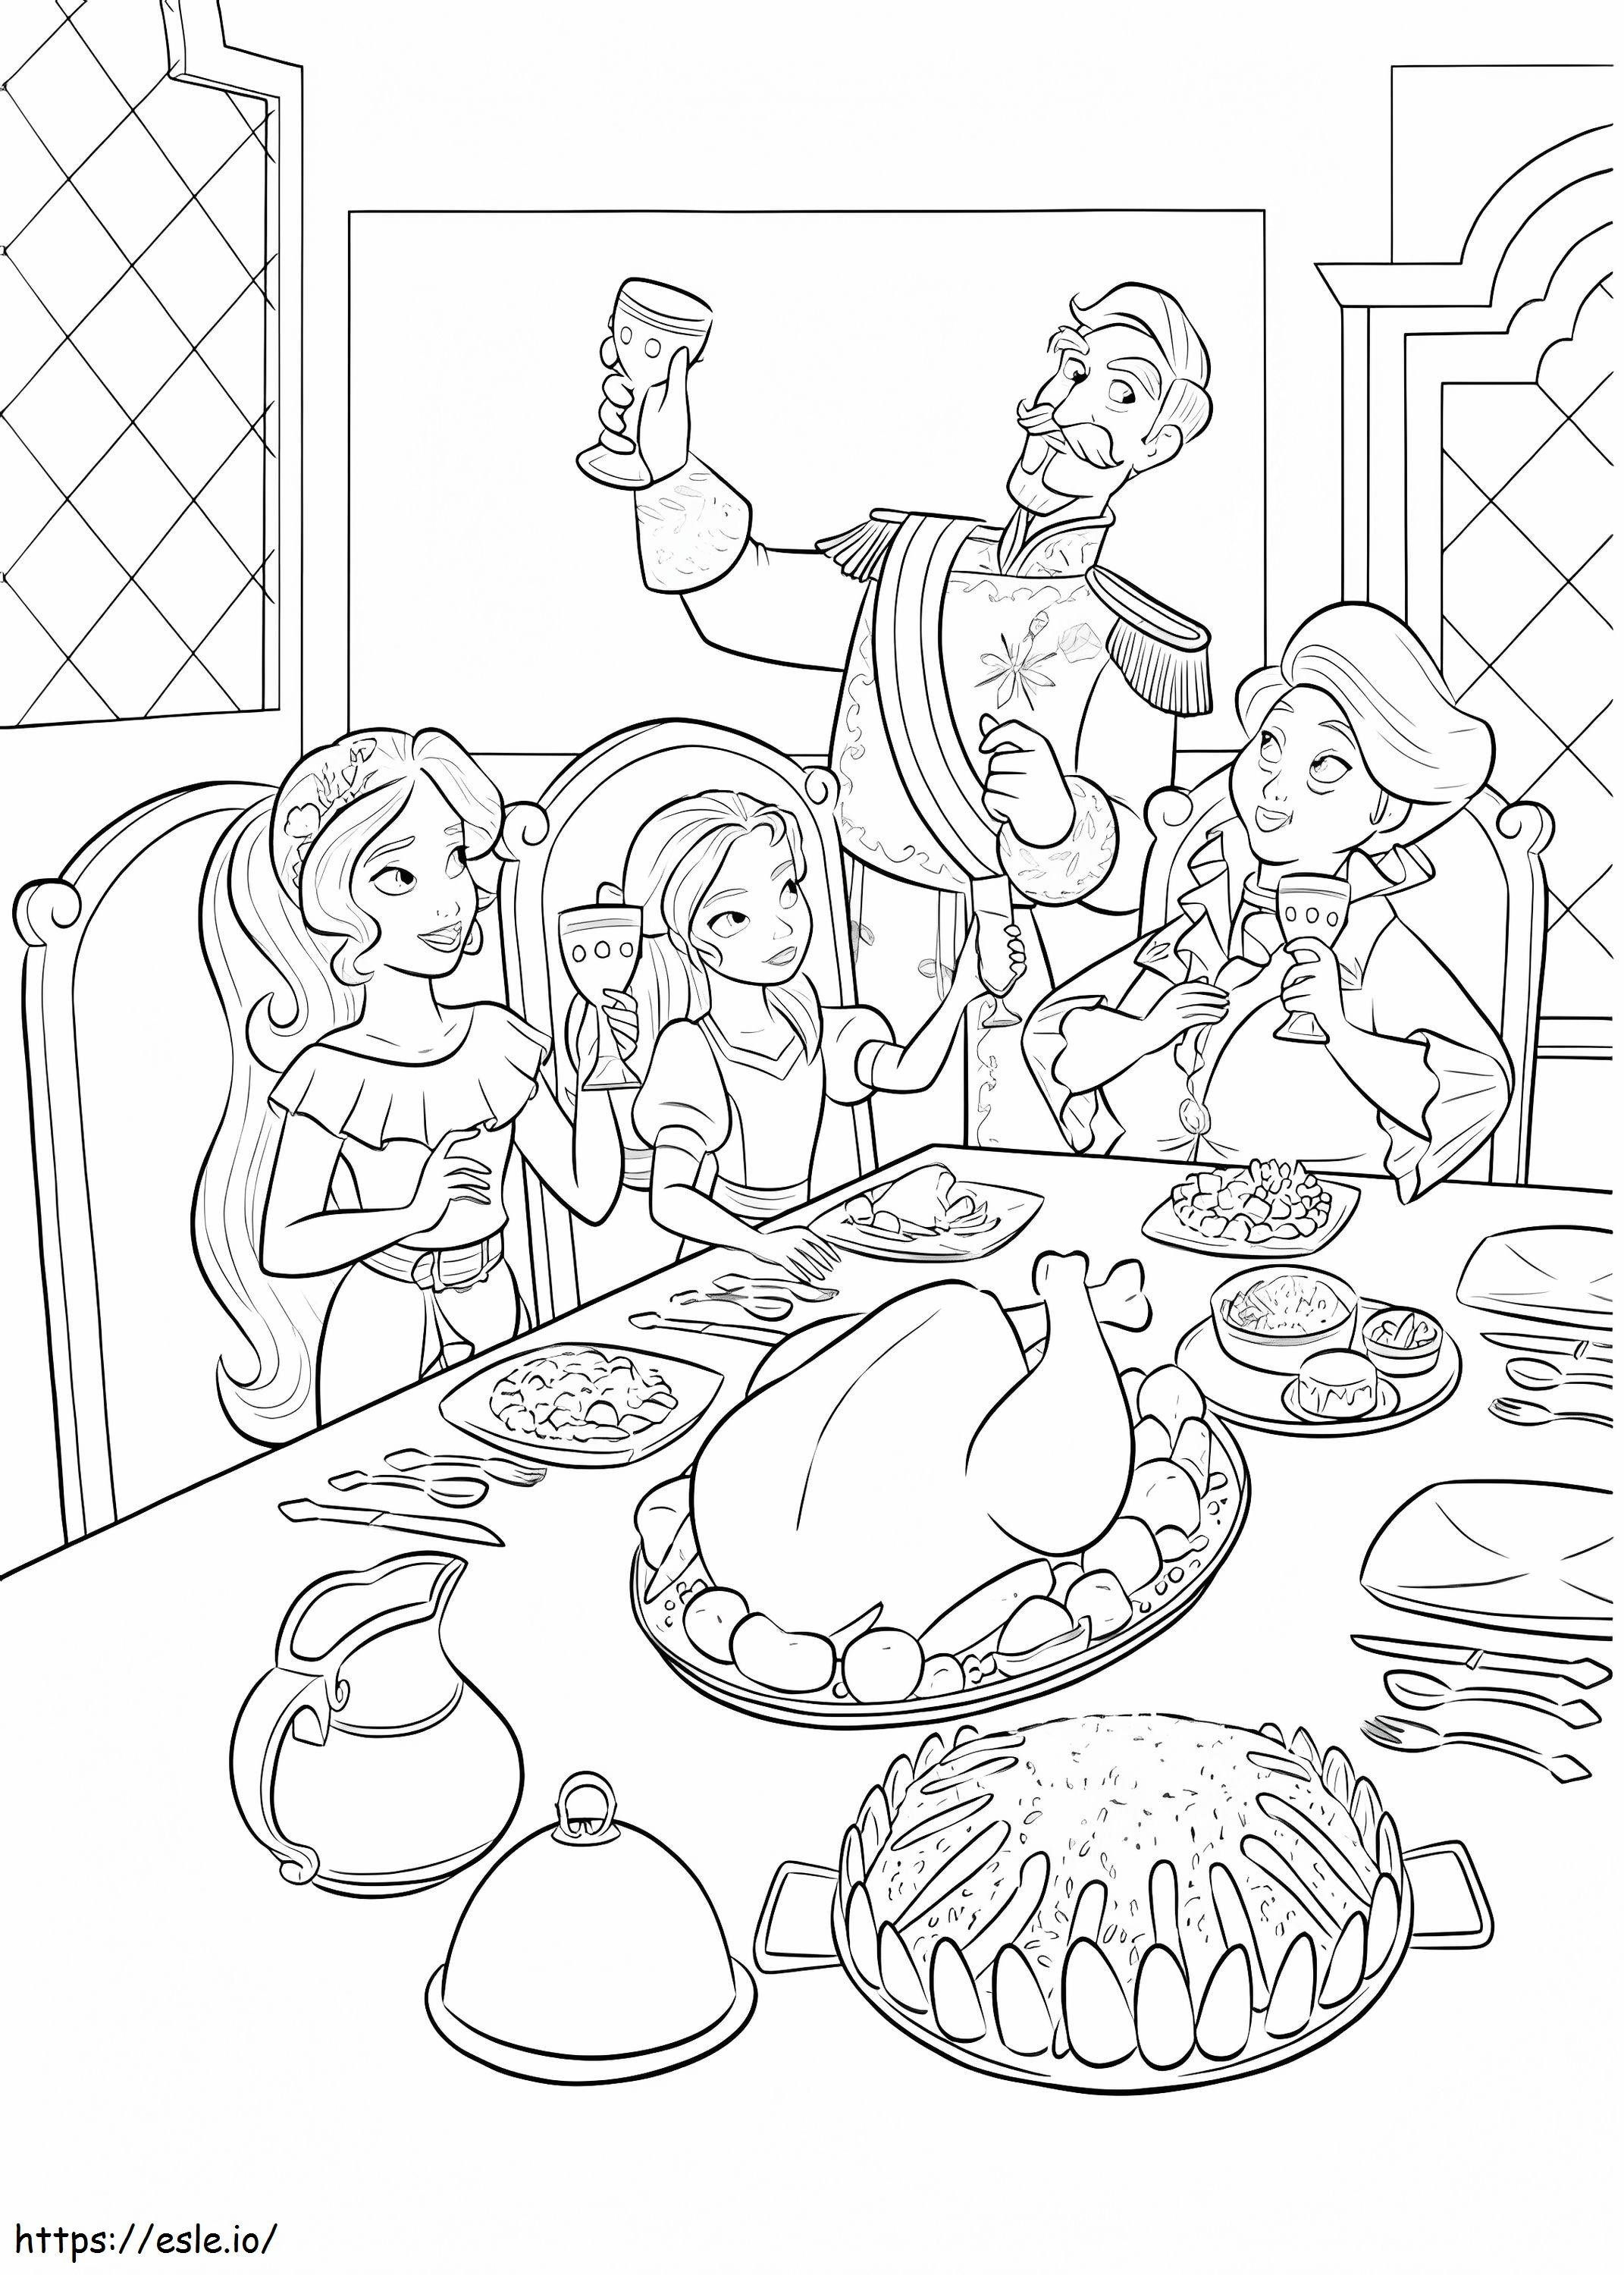 1535081524 Family Dinner Of Elena A4 coloring page